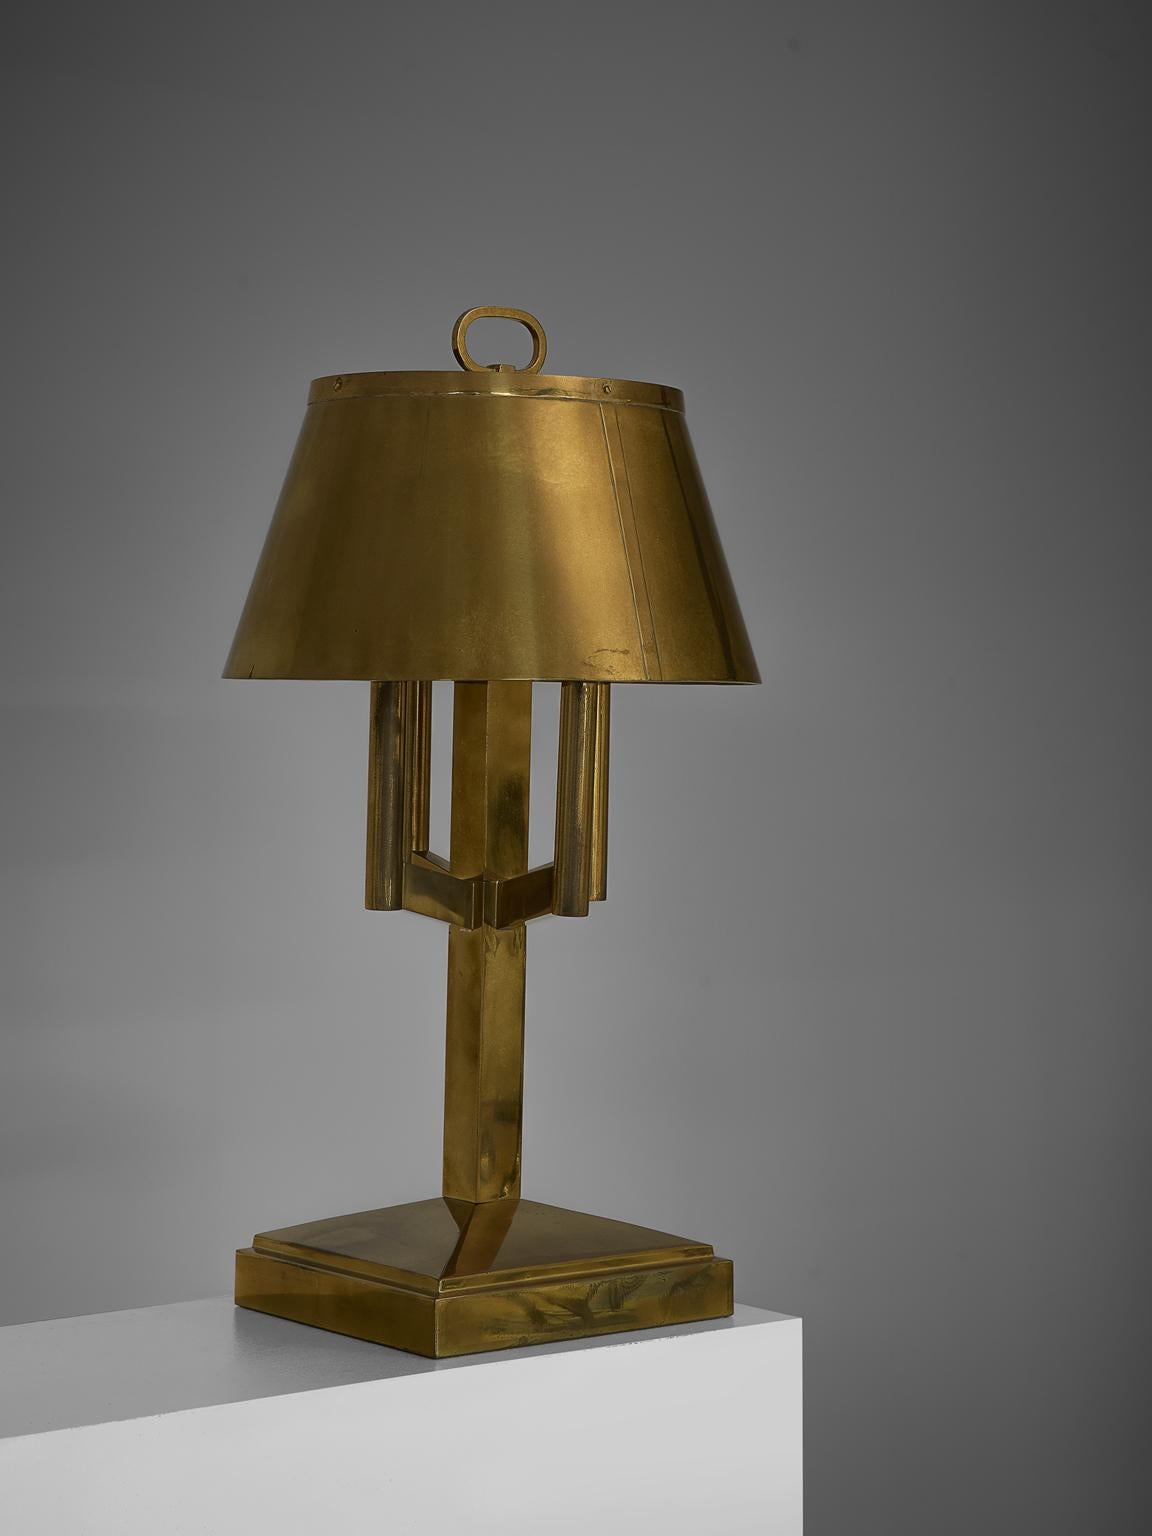 Table lights, brass, Italy, 1940s.

This strong and sturdy table lamp bears strong traits of the Classic shaded desk light. Yet the shades are combined with an strong, angular bases, giving them a modern aesthetic. These lamps have, due to time and